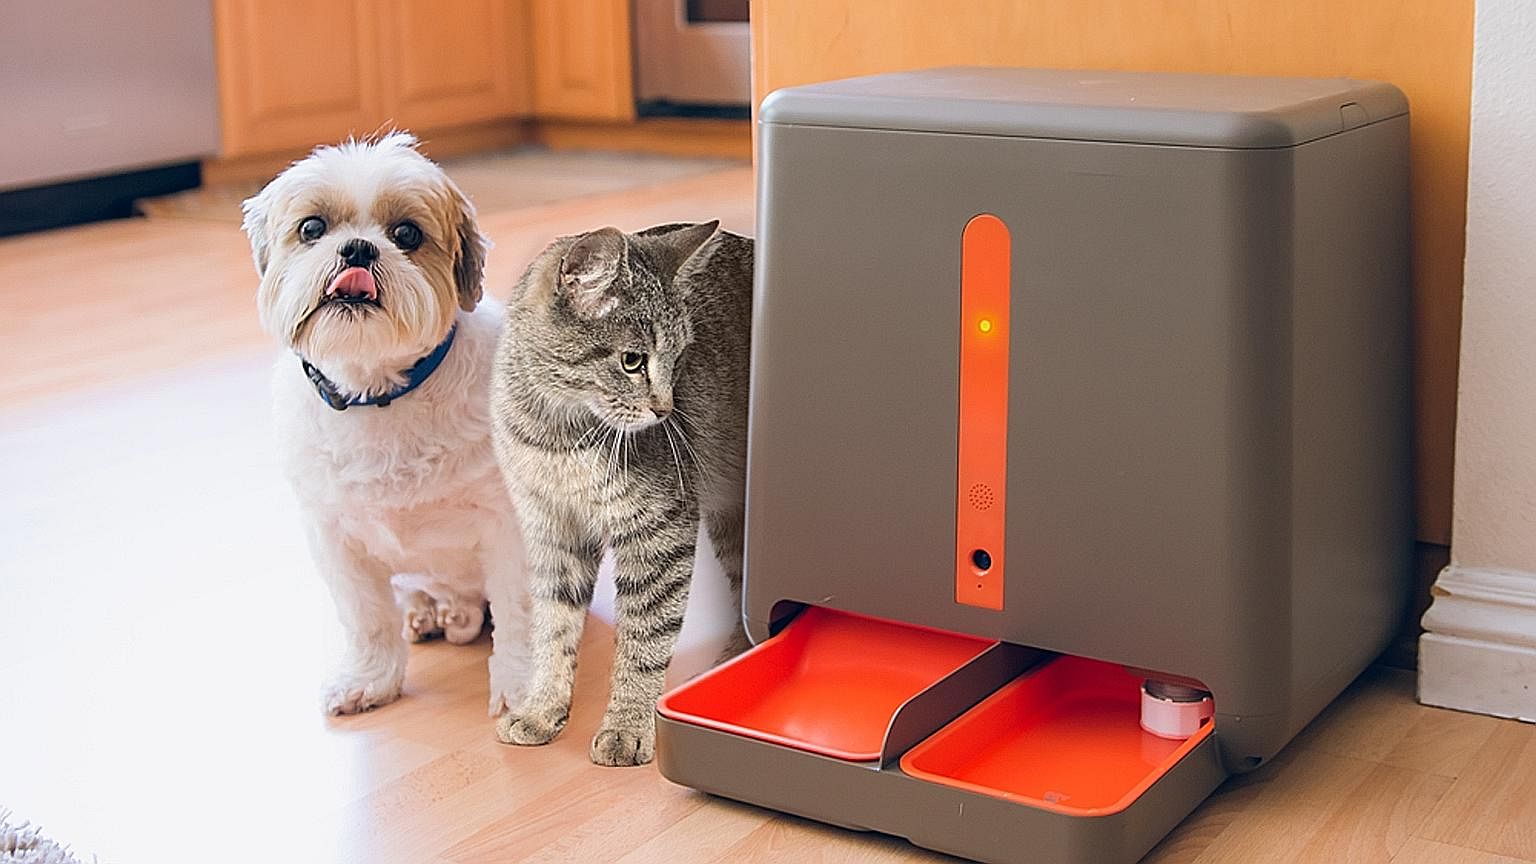 The gosh! easyFeed is equipped with a speaker and microphone so owners can call out to their pet buddies when food is to be dispensed.